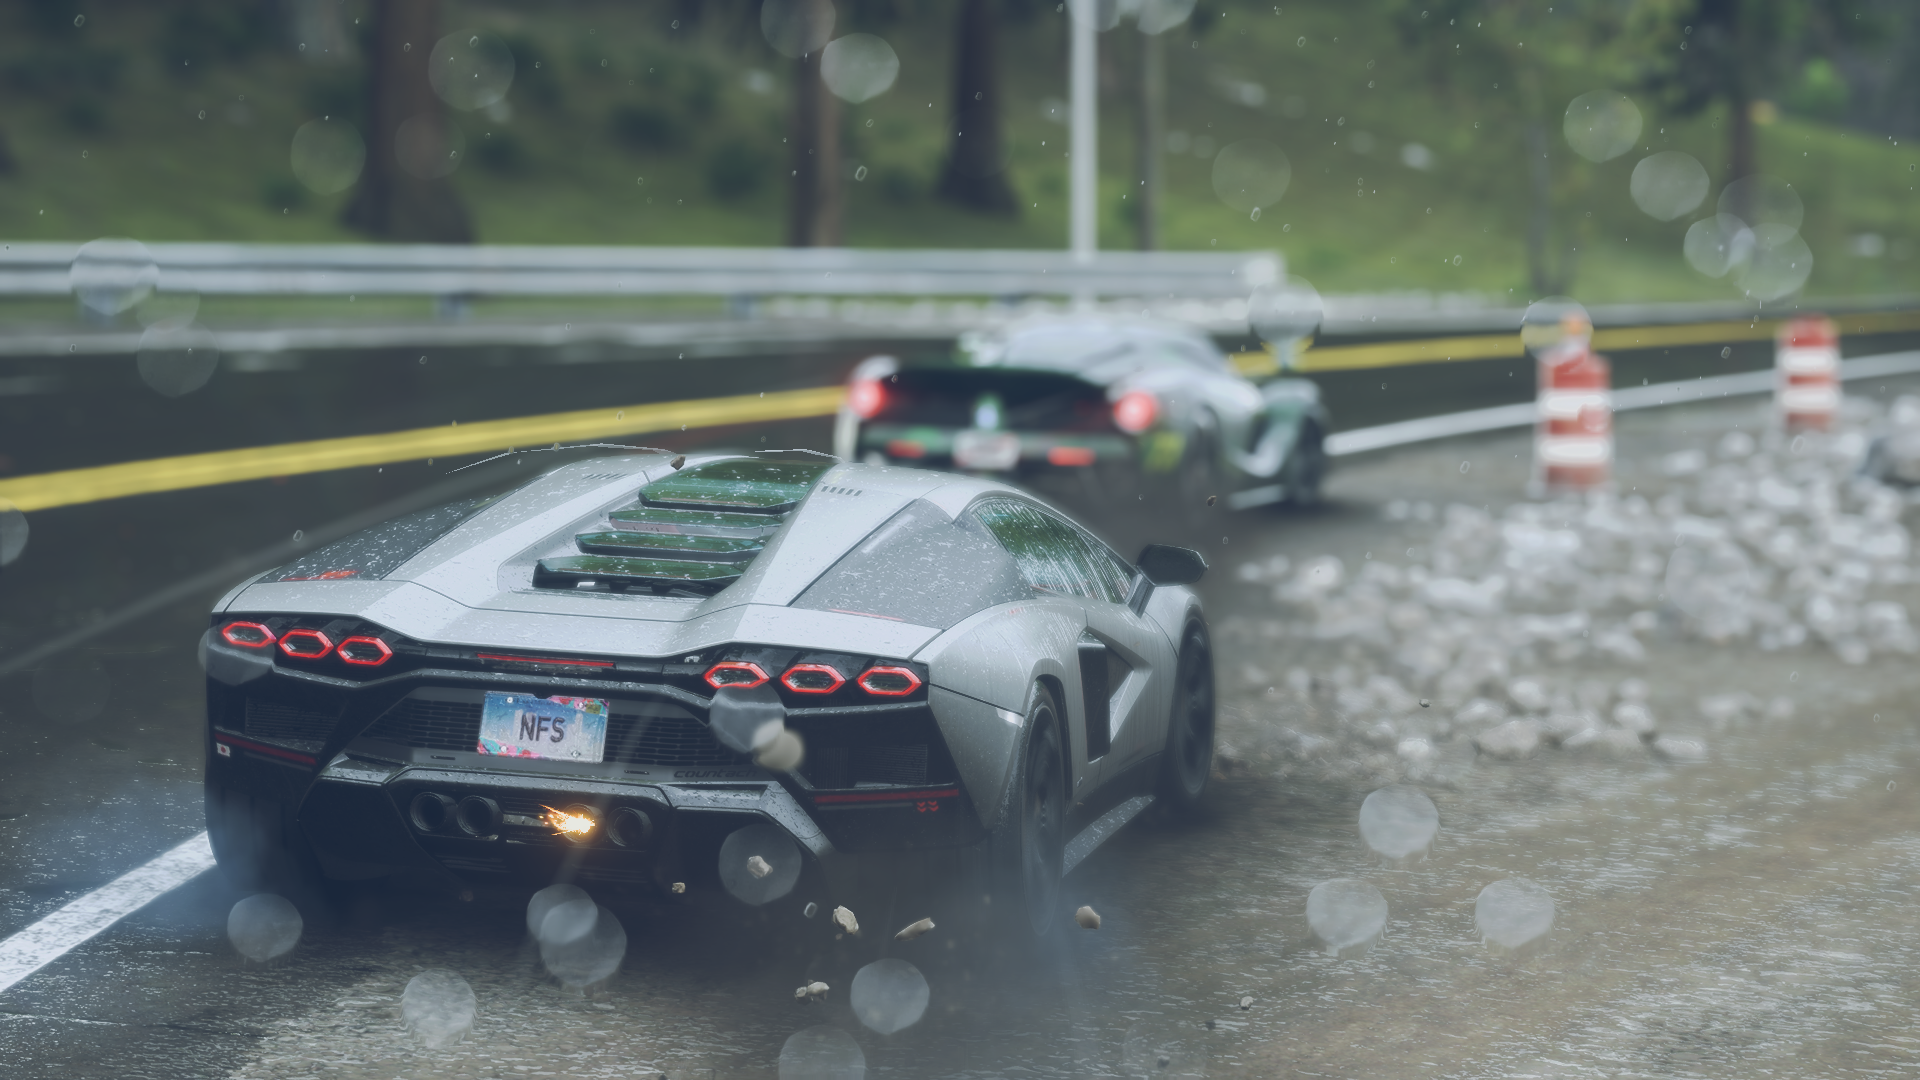 General 1920x1080 Need for Speed car video games licence plates street CGI taillights rain rear view